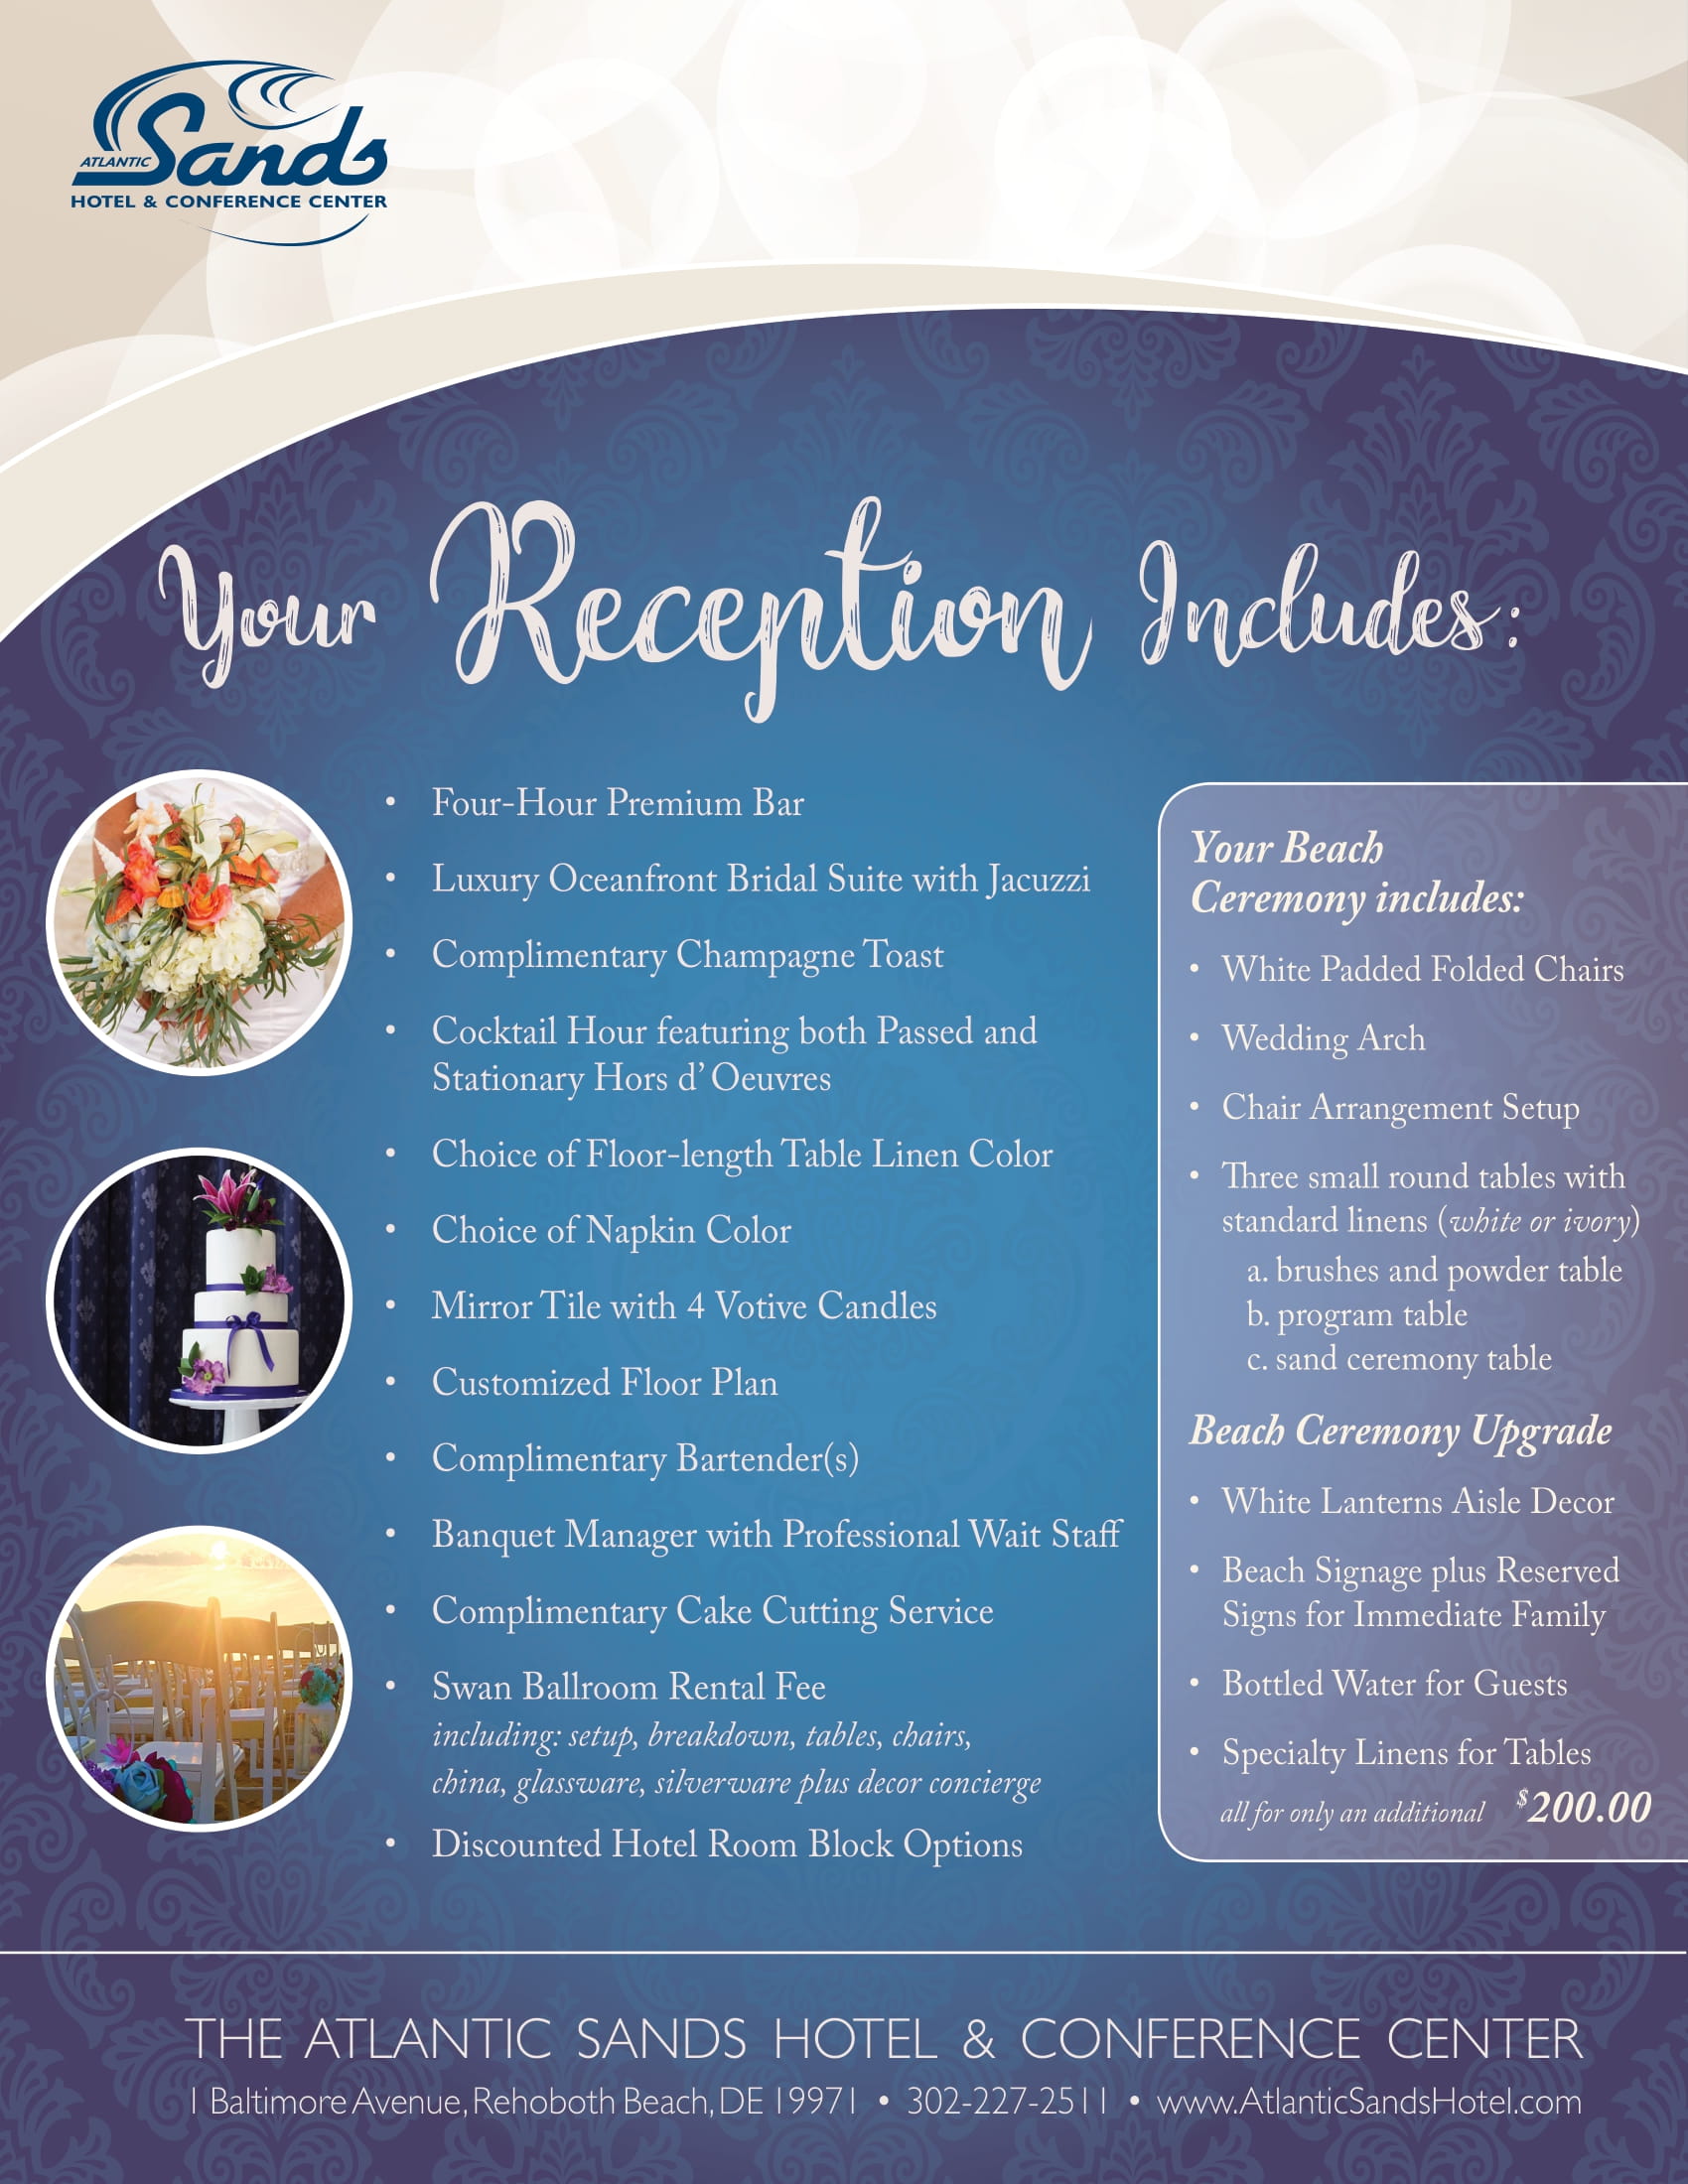 List of what reception includes. Call 302-227-2511for details.